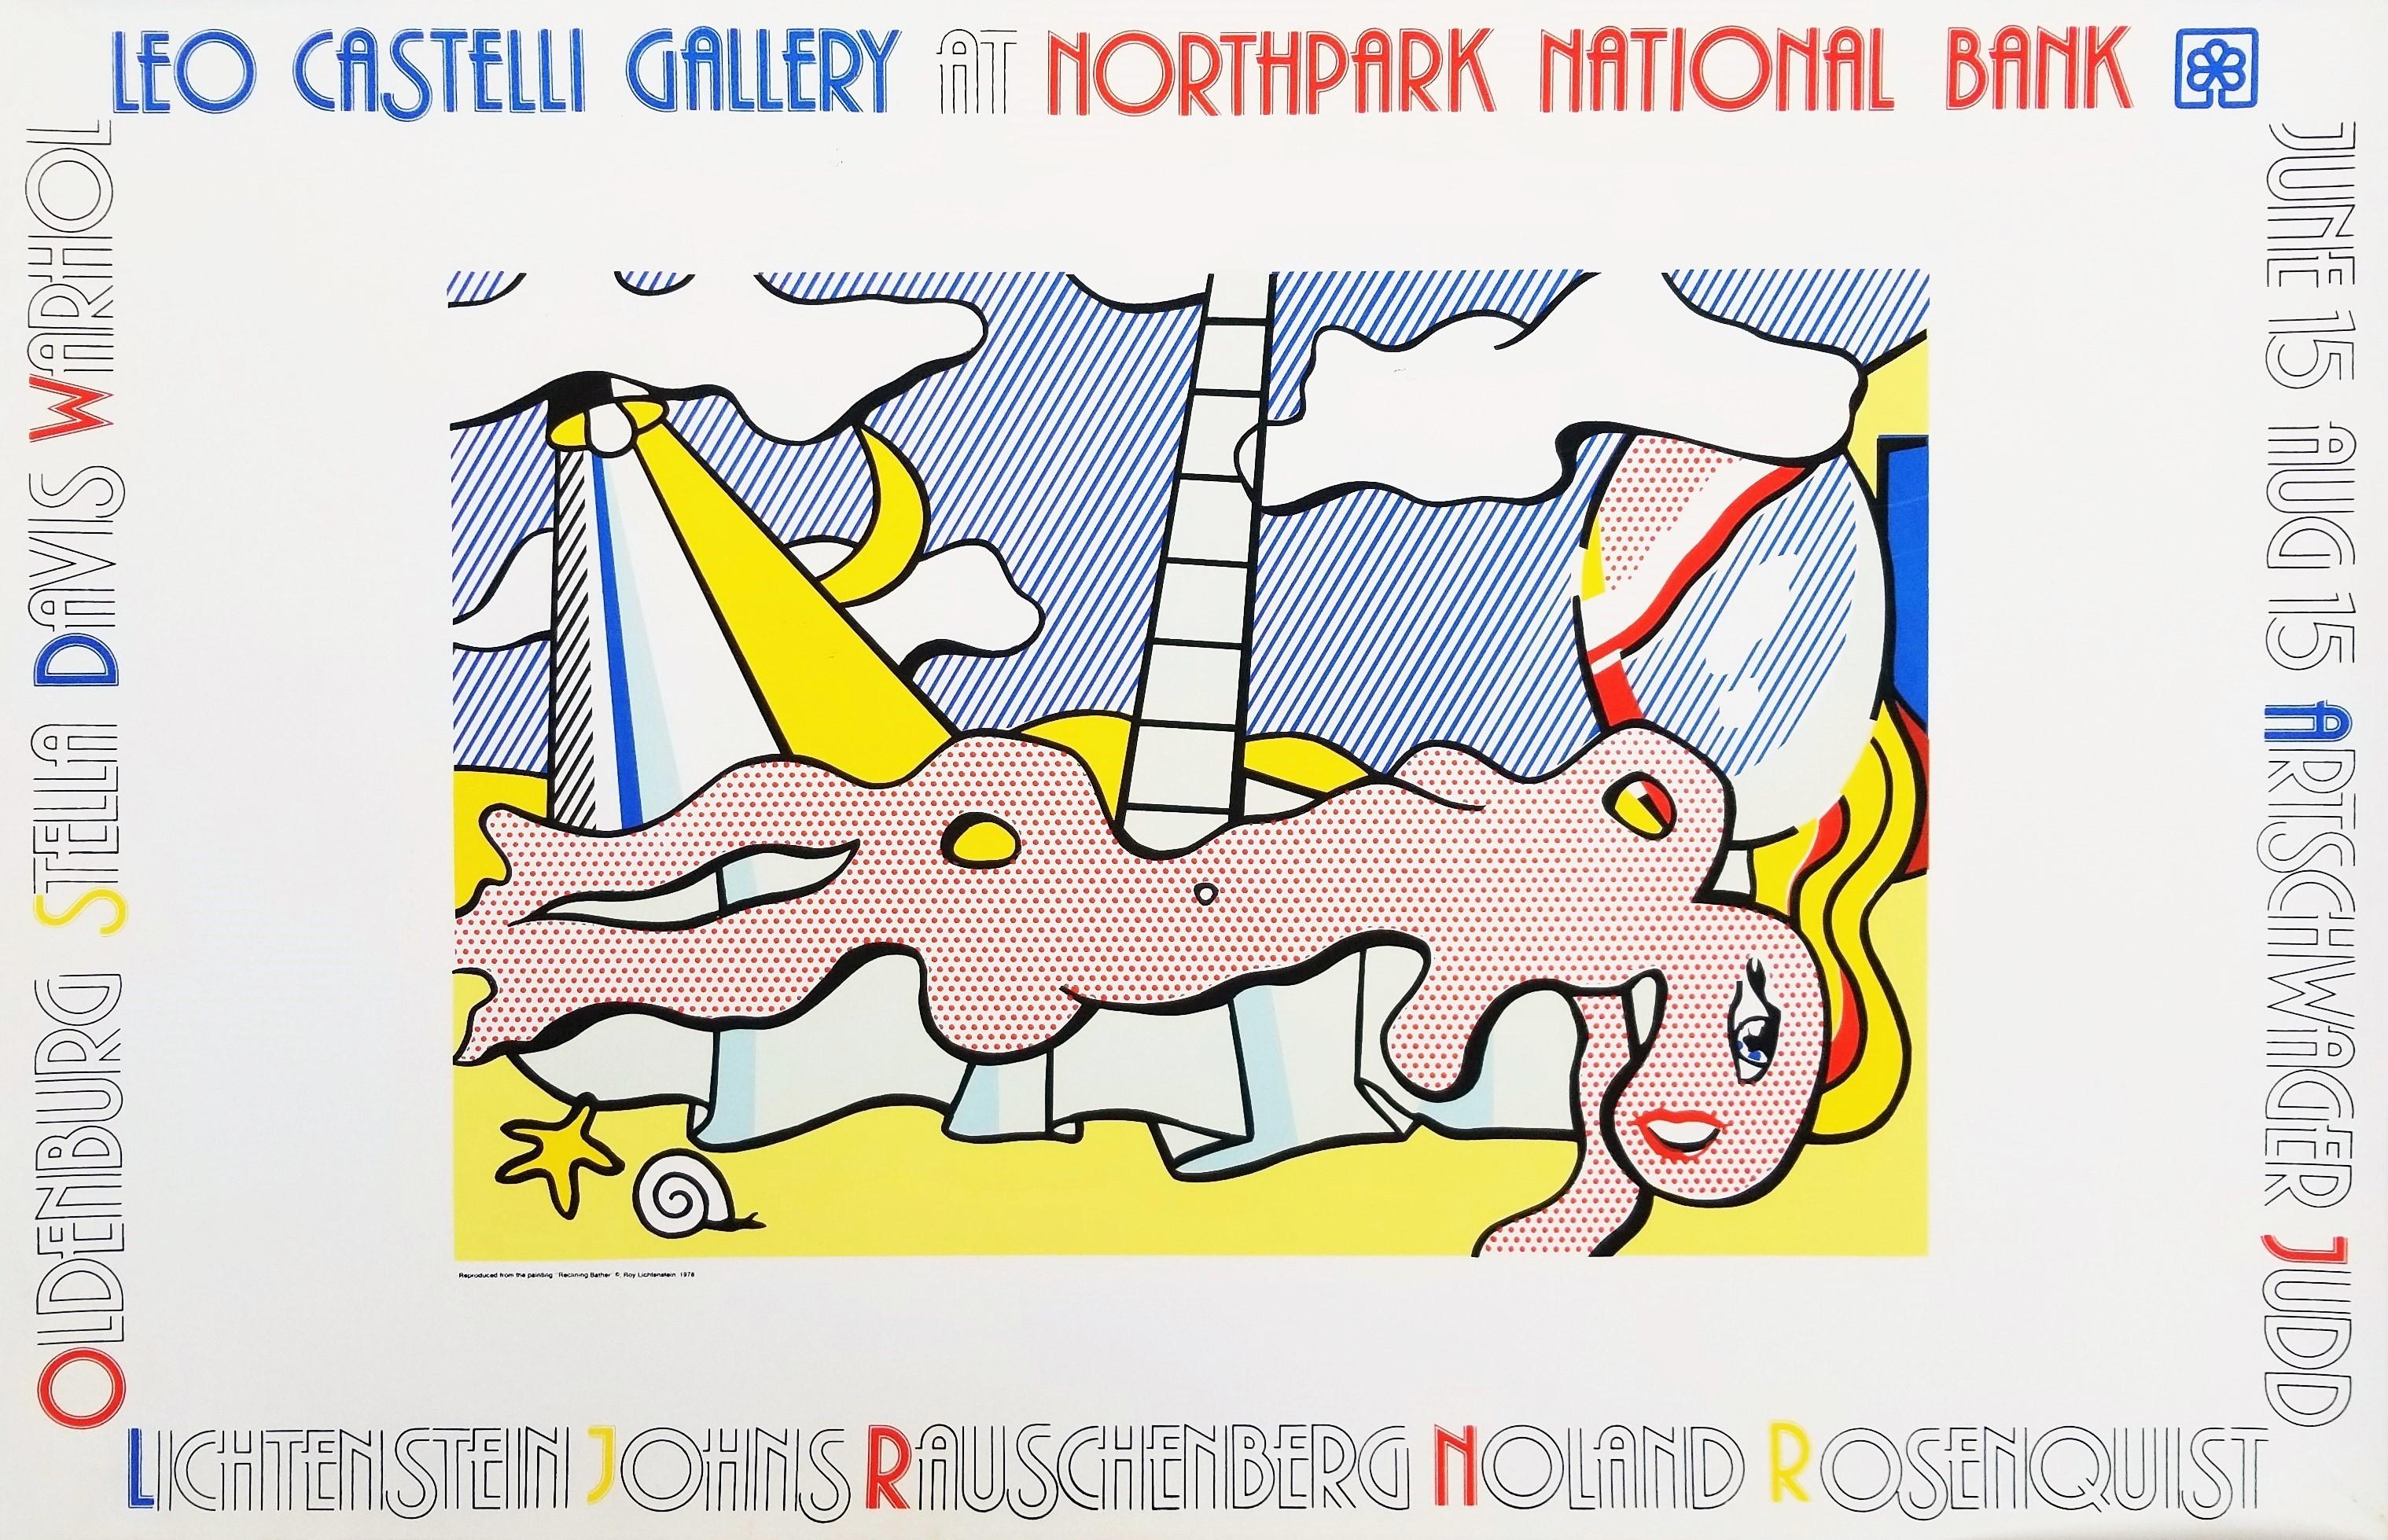 Leo Castelli Gallery at Northpark National Bank (Reclining Bather) Poster